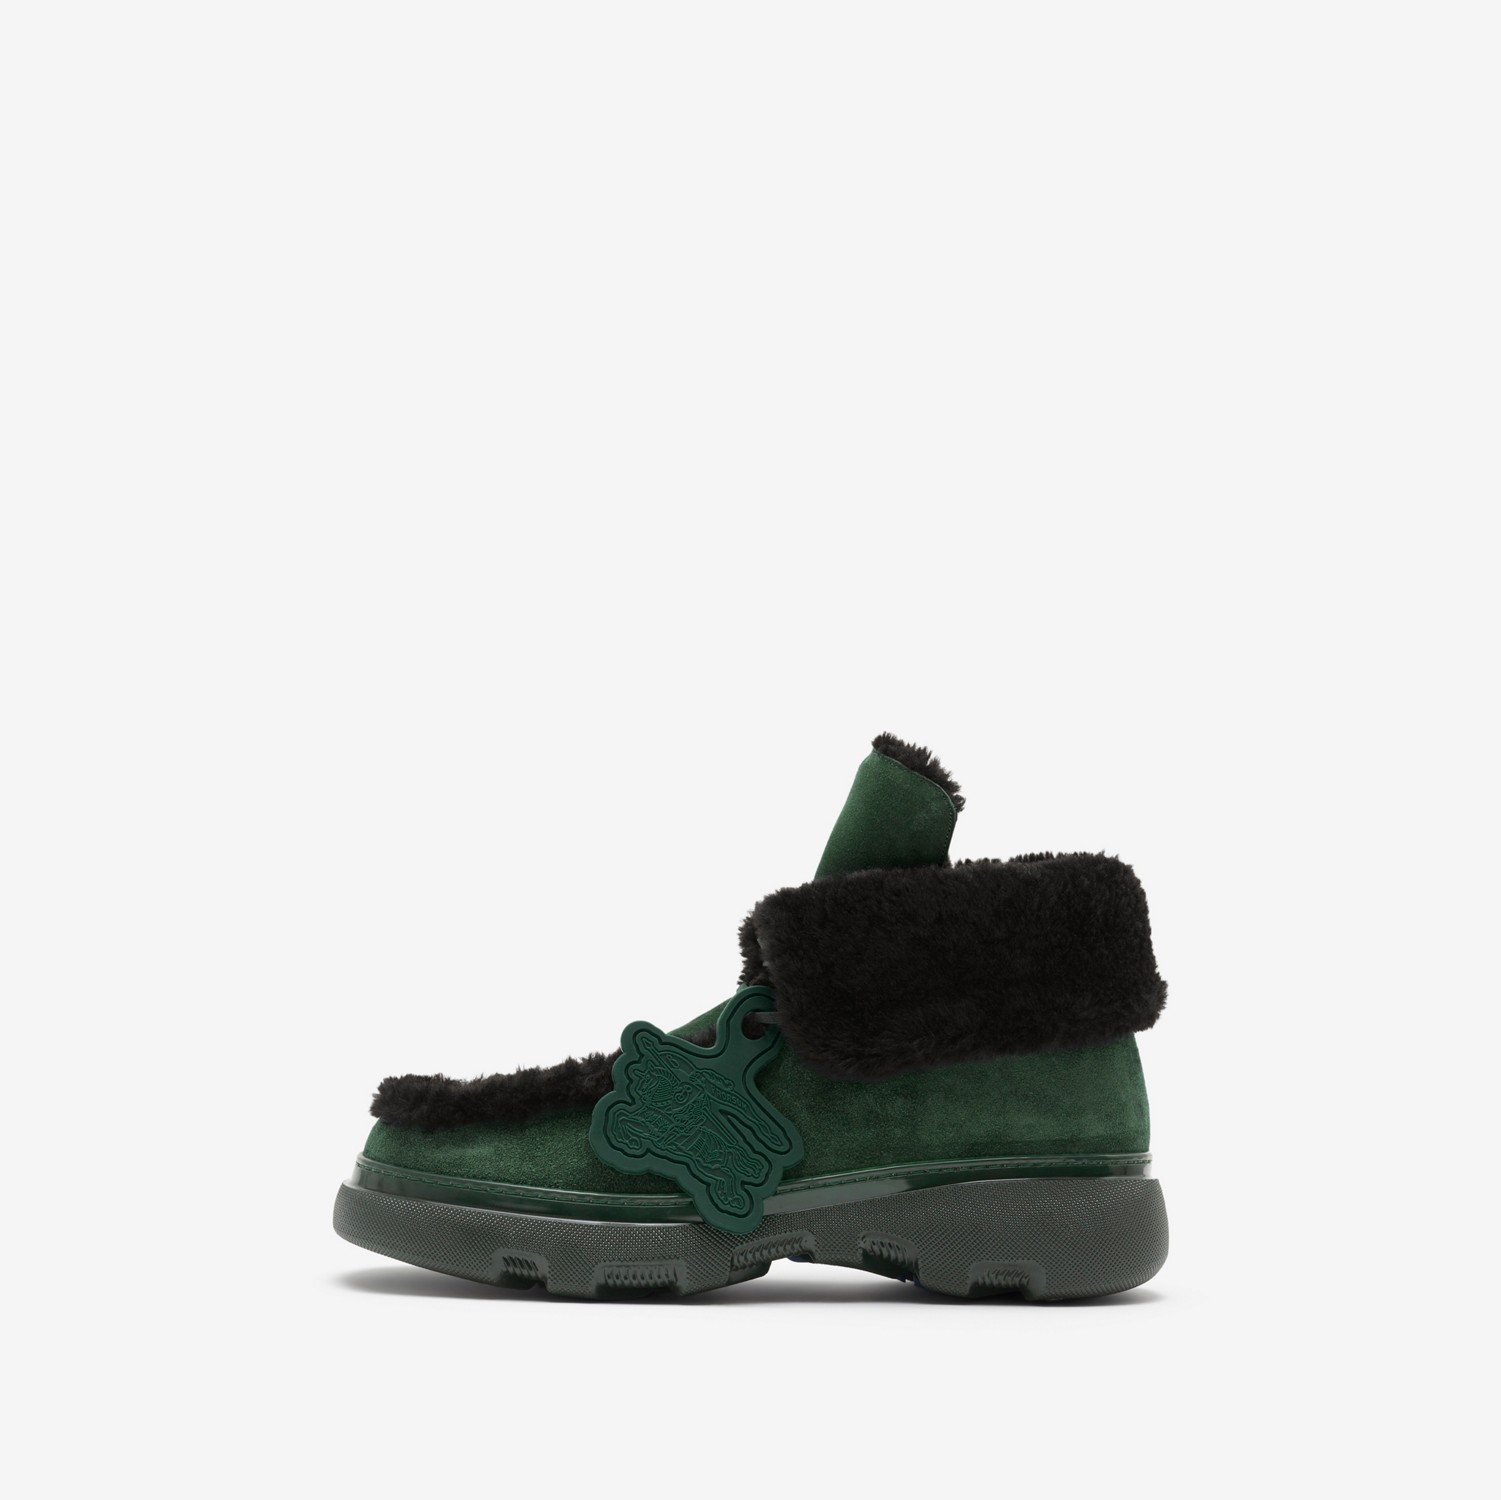 Shearling Creeper High Shoes in Vine/black - Men | Burberry® Official